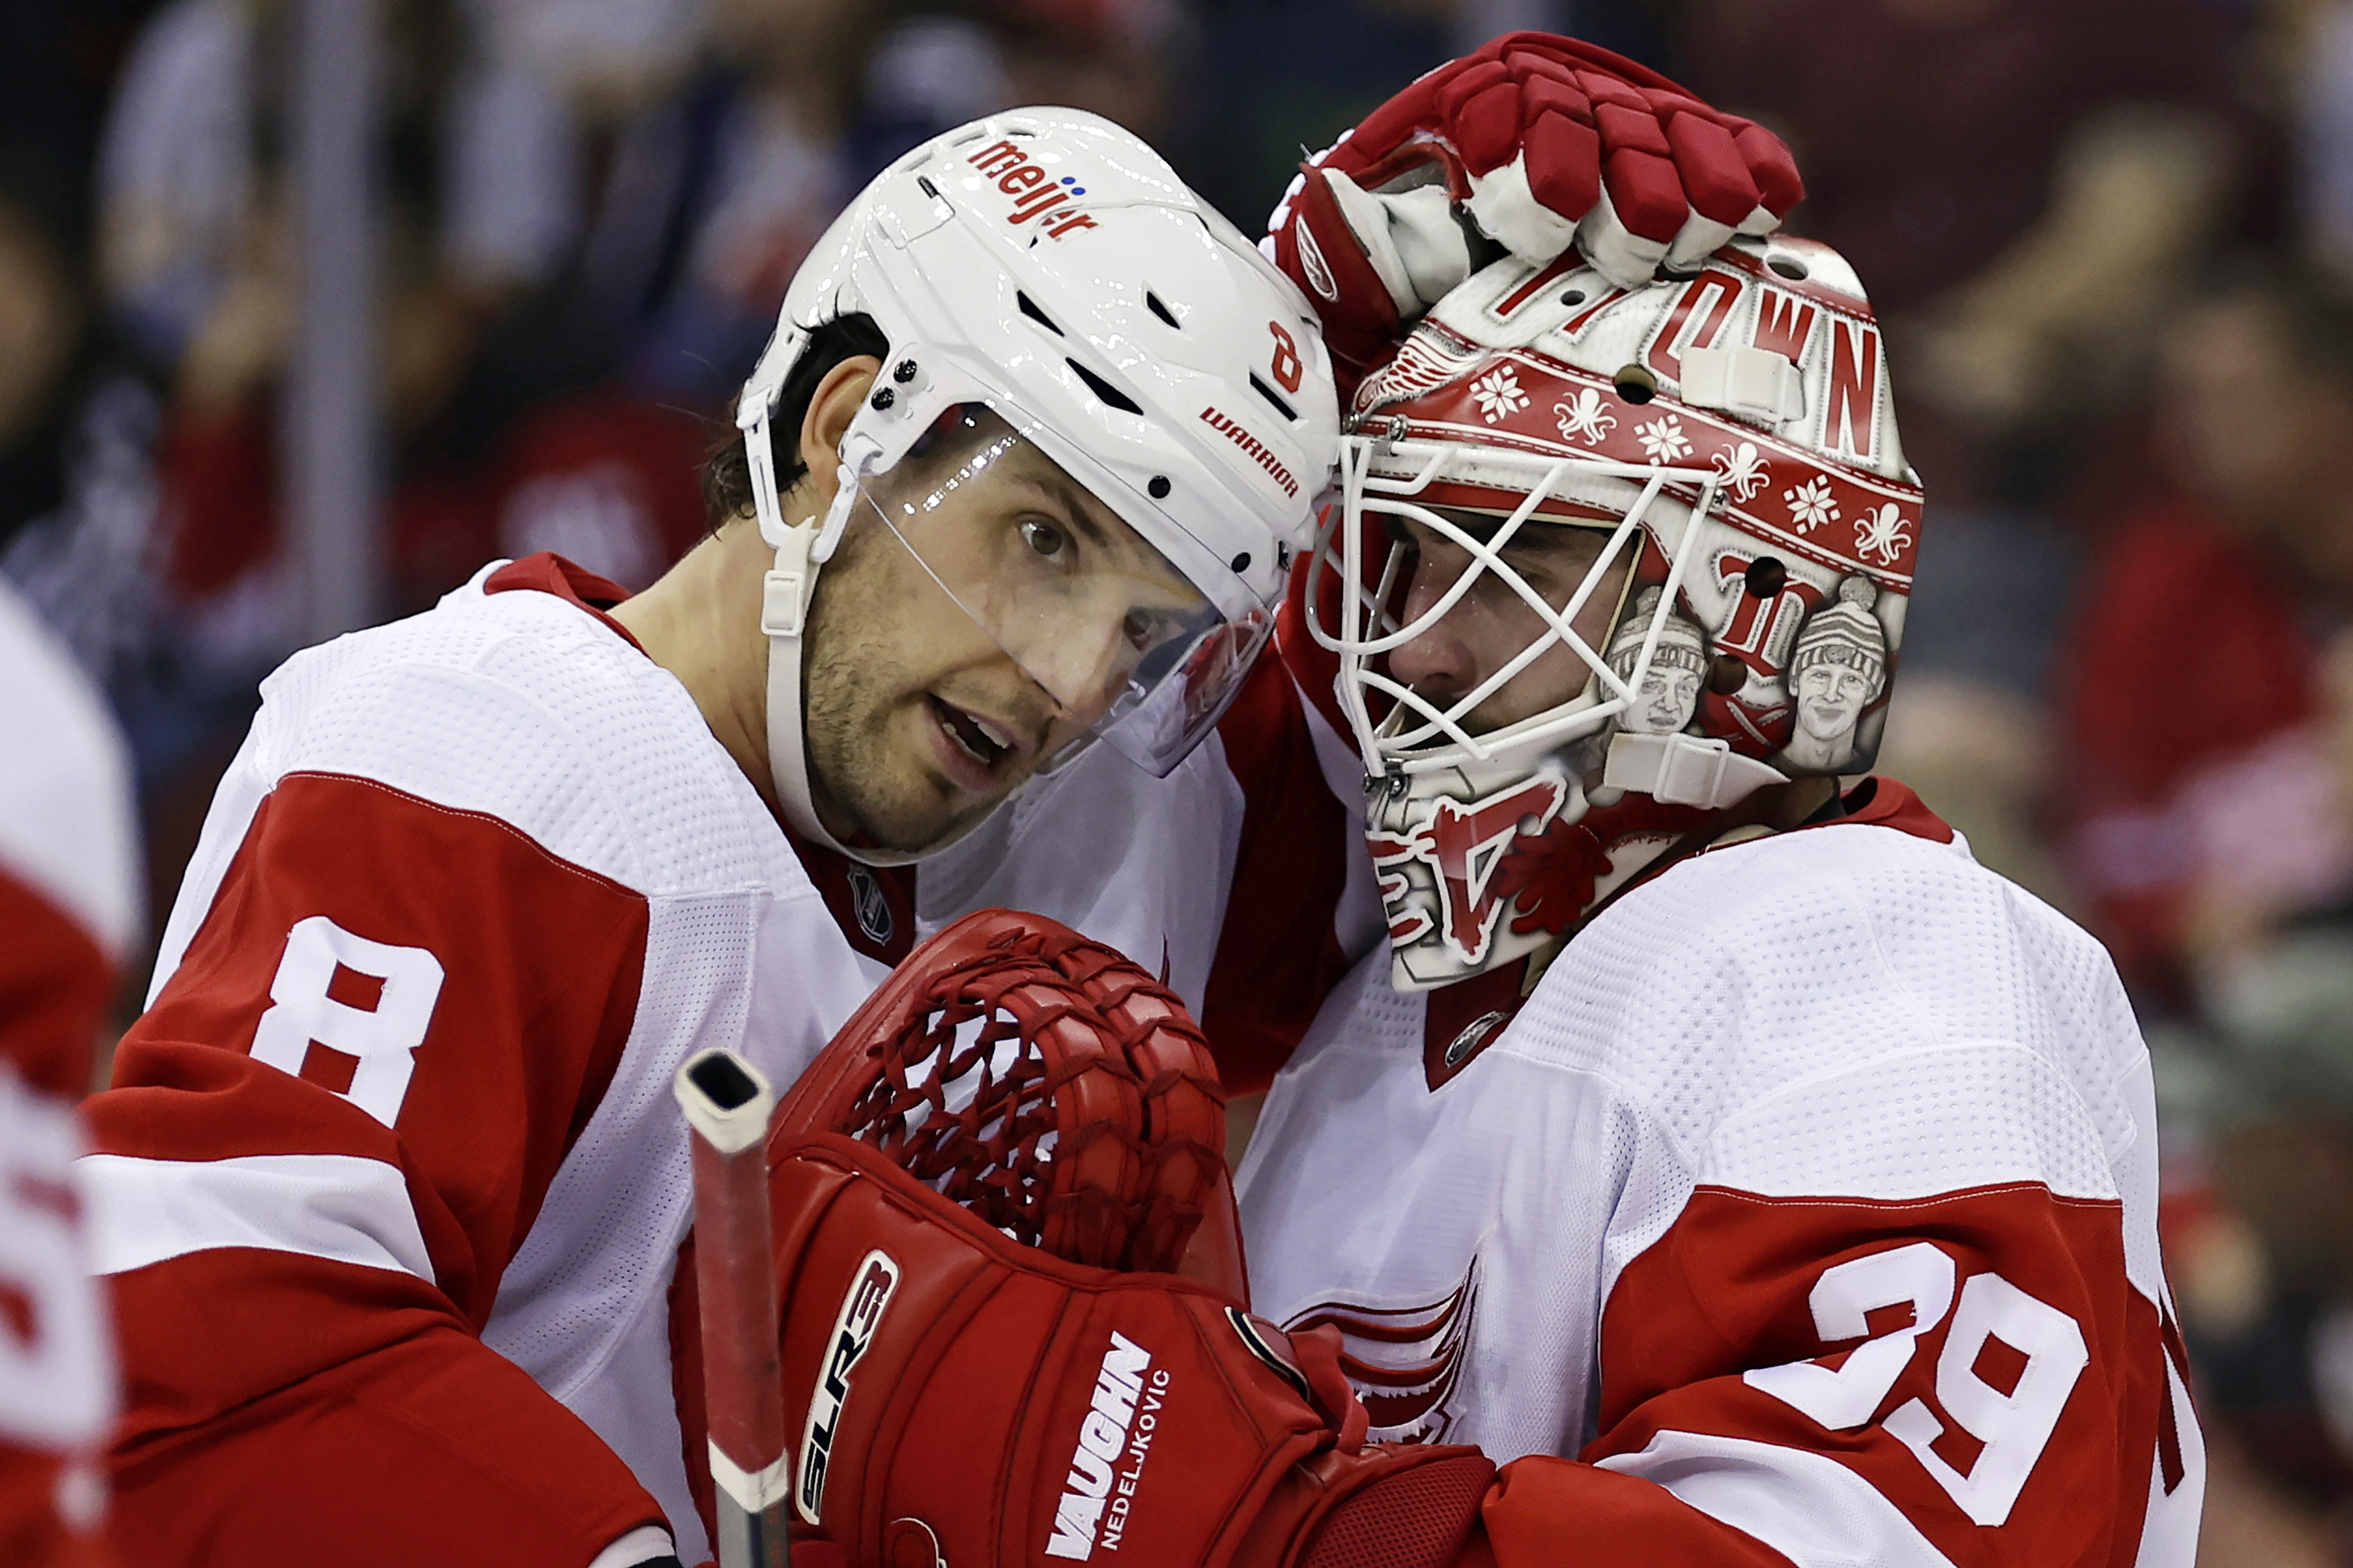 Wings' Ben Chiarot on joining his second Original Six team